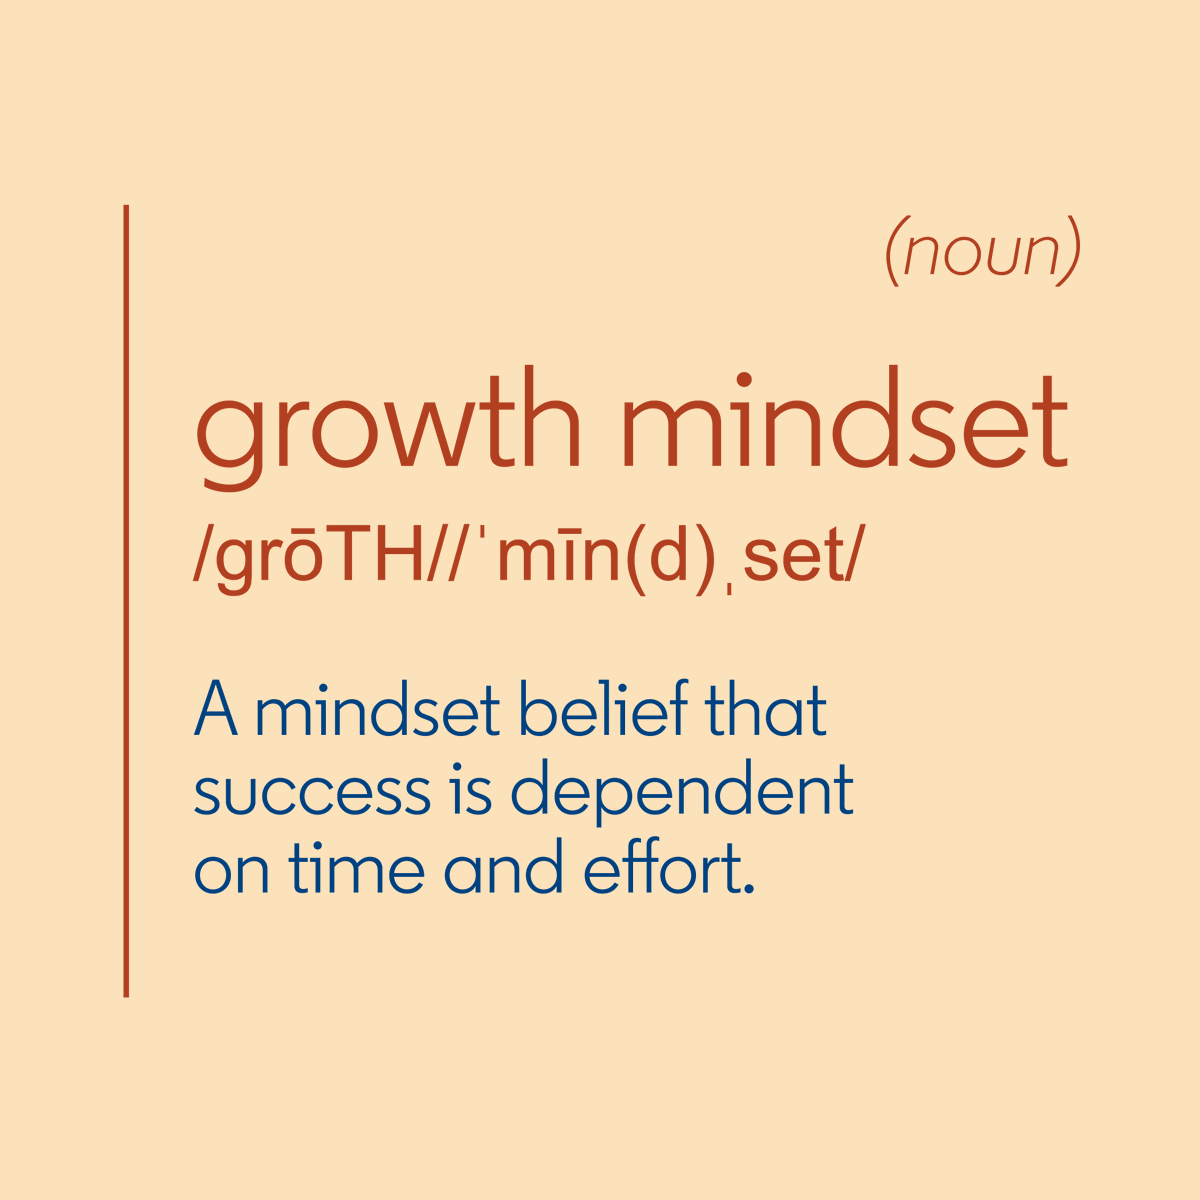 How do you foster a growth mindset? Share your tips in the comments 👇